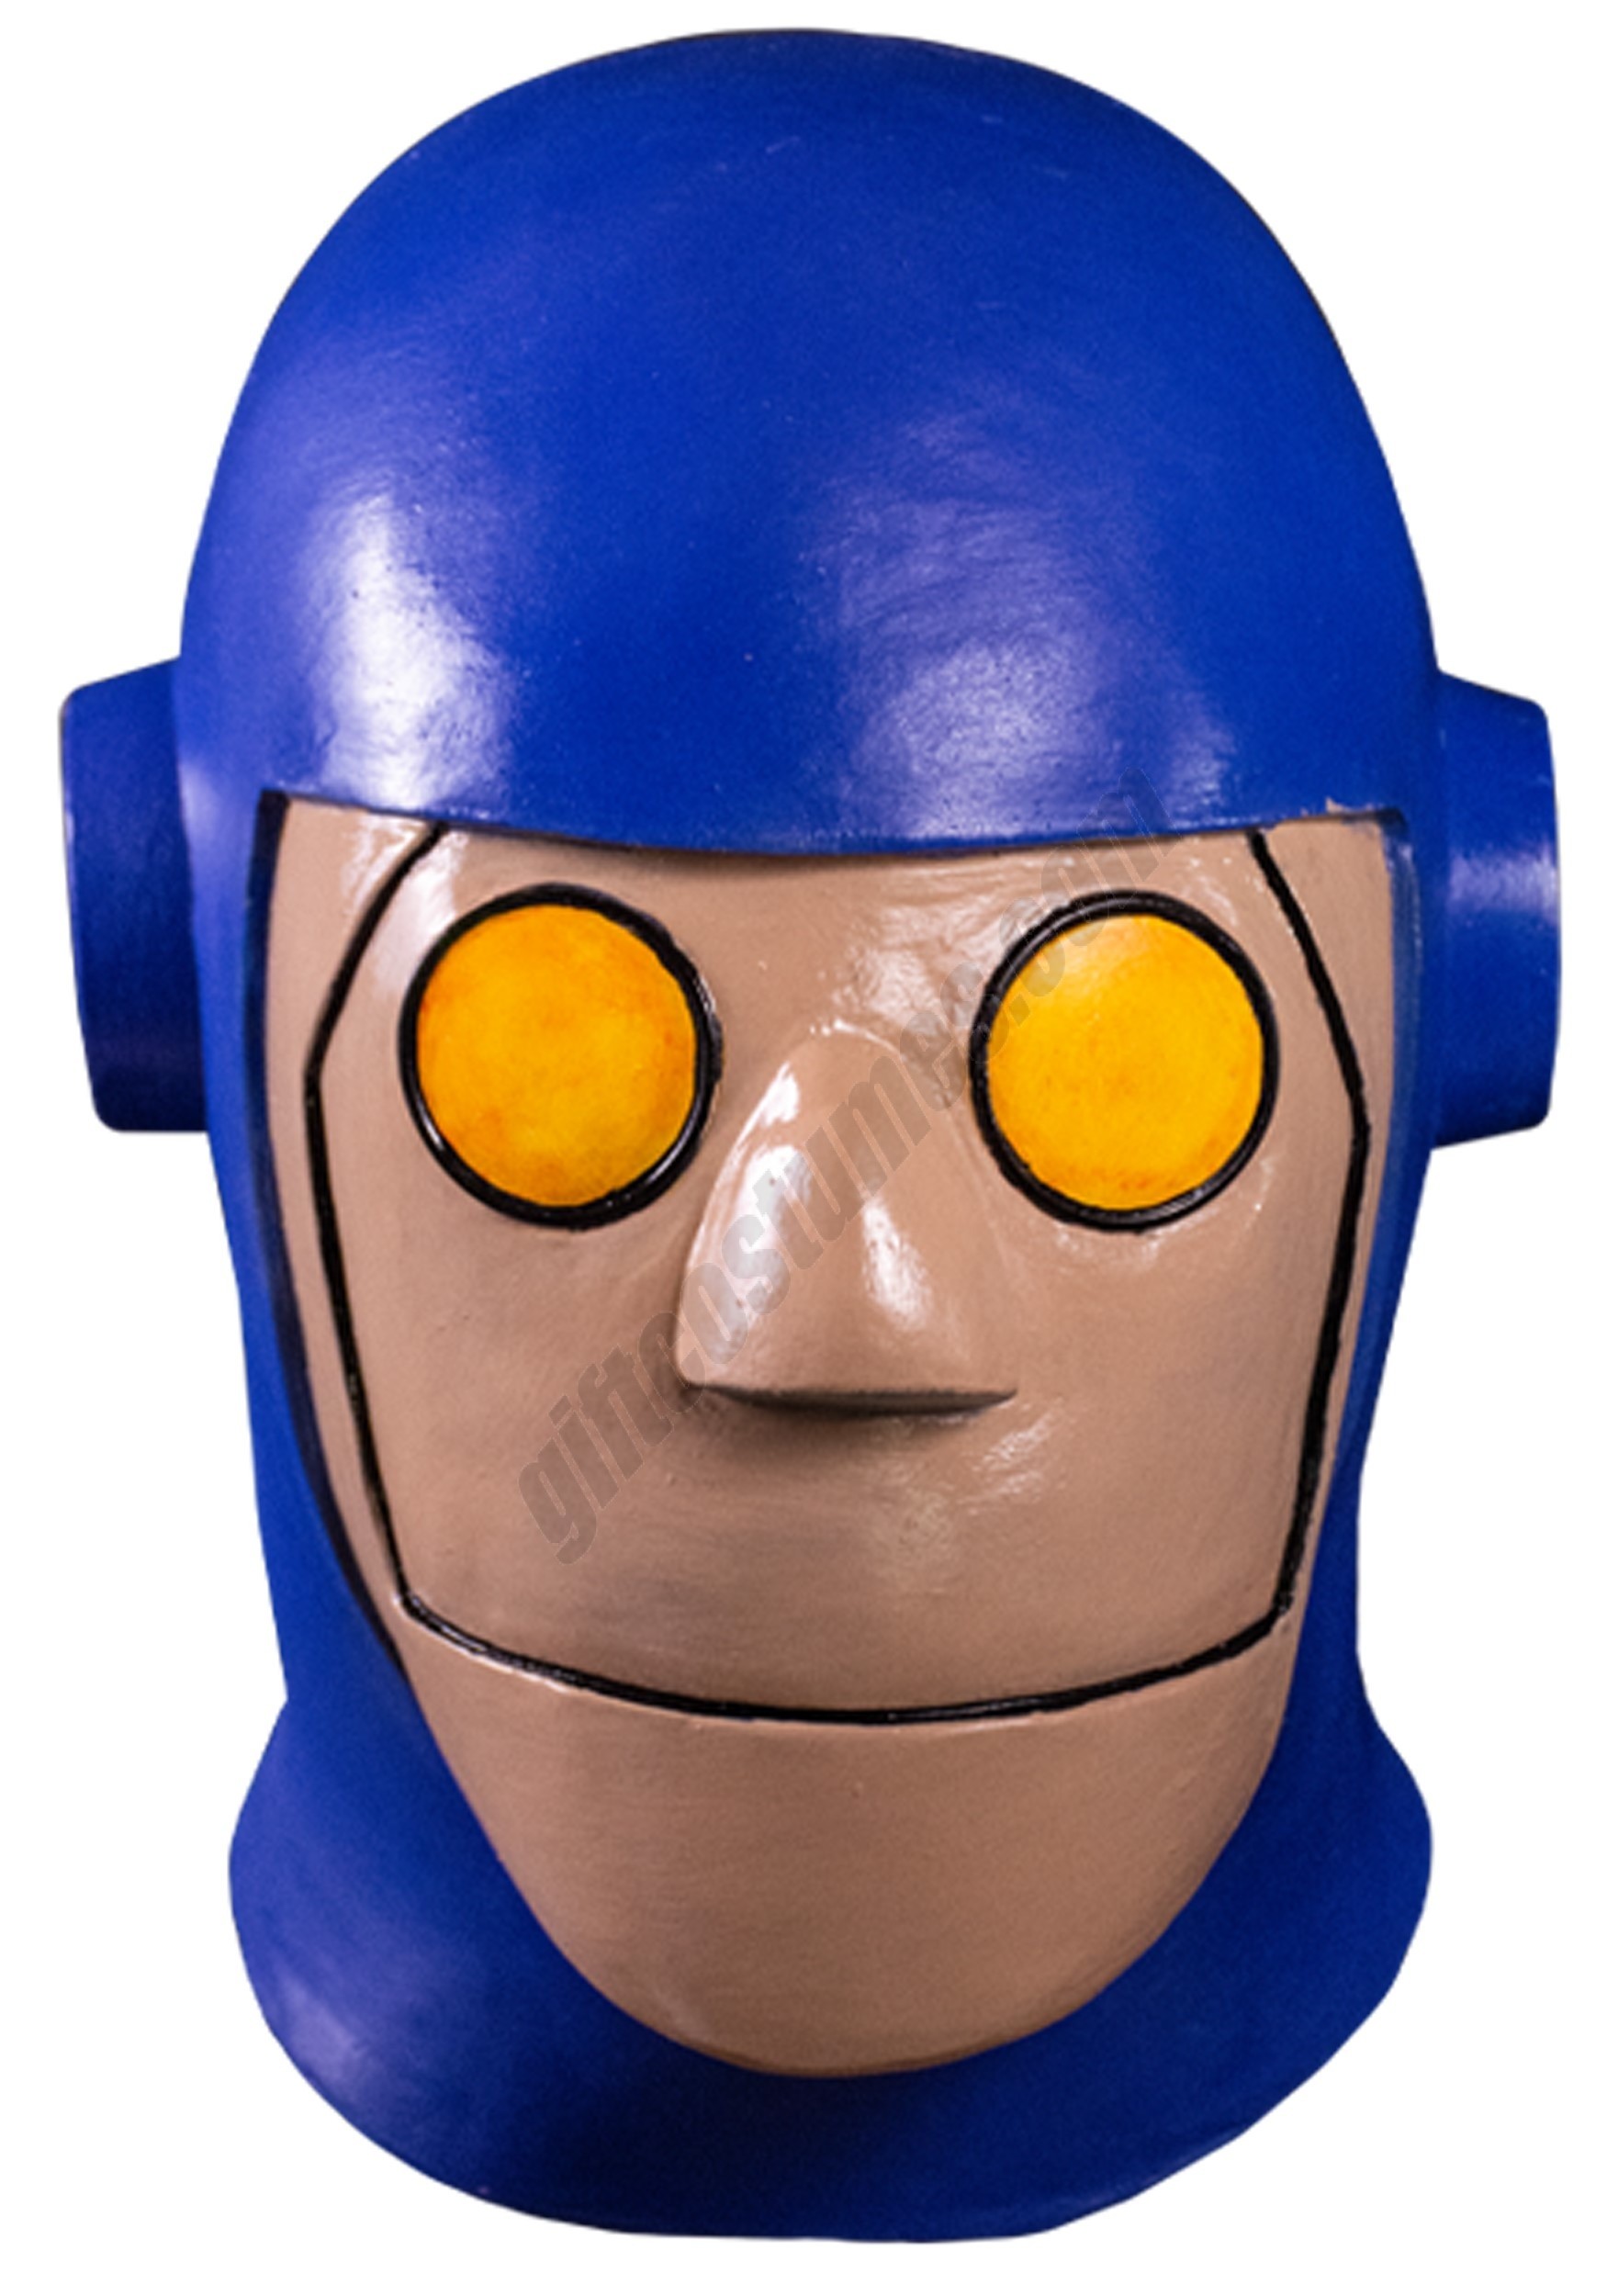 Scooby Doo Charlie The Robot Costume Mask Promotions - Scooby Doo Charlie The Robot Costume Mask Promotions